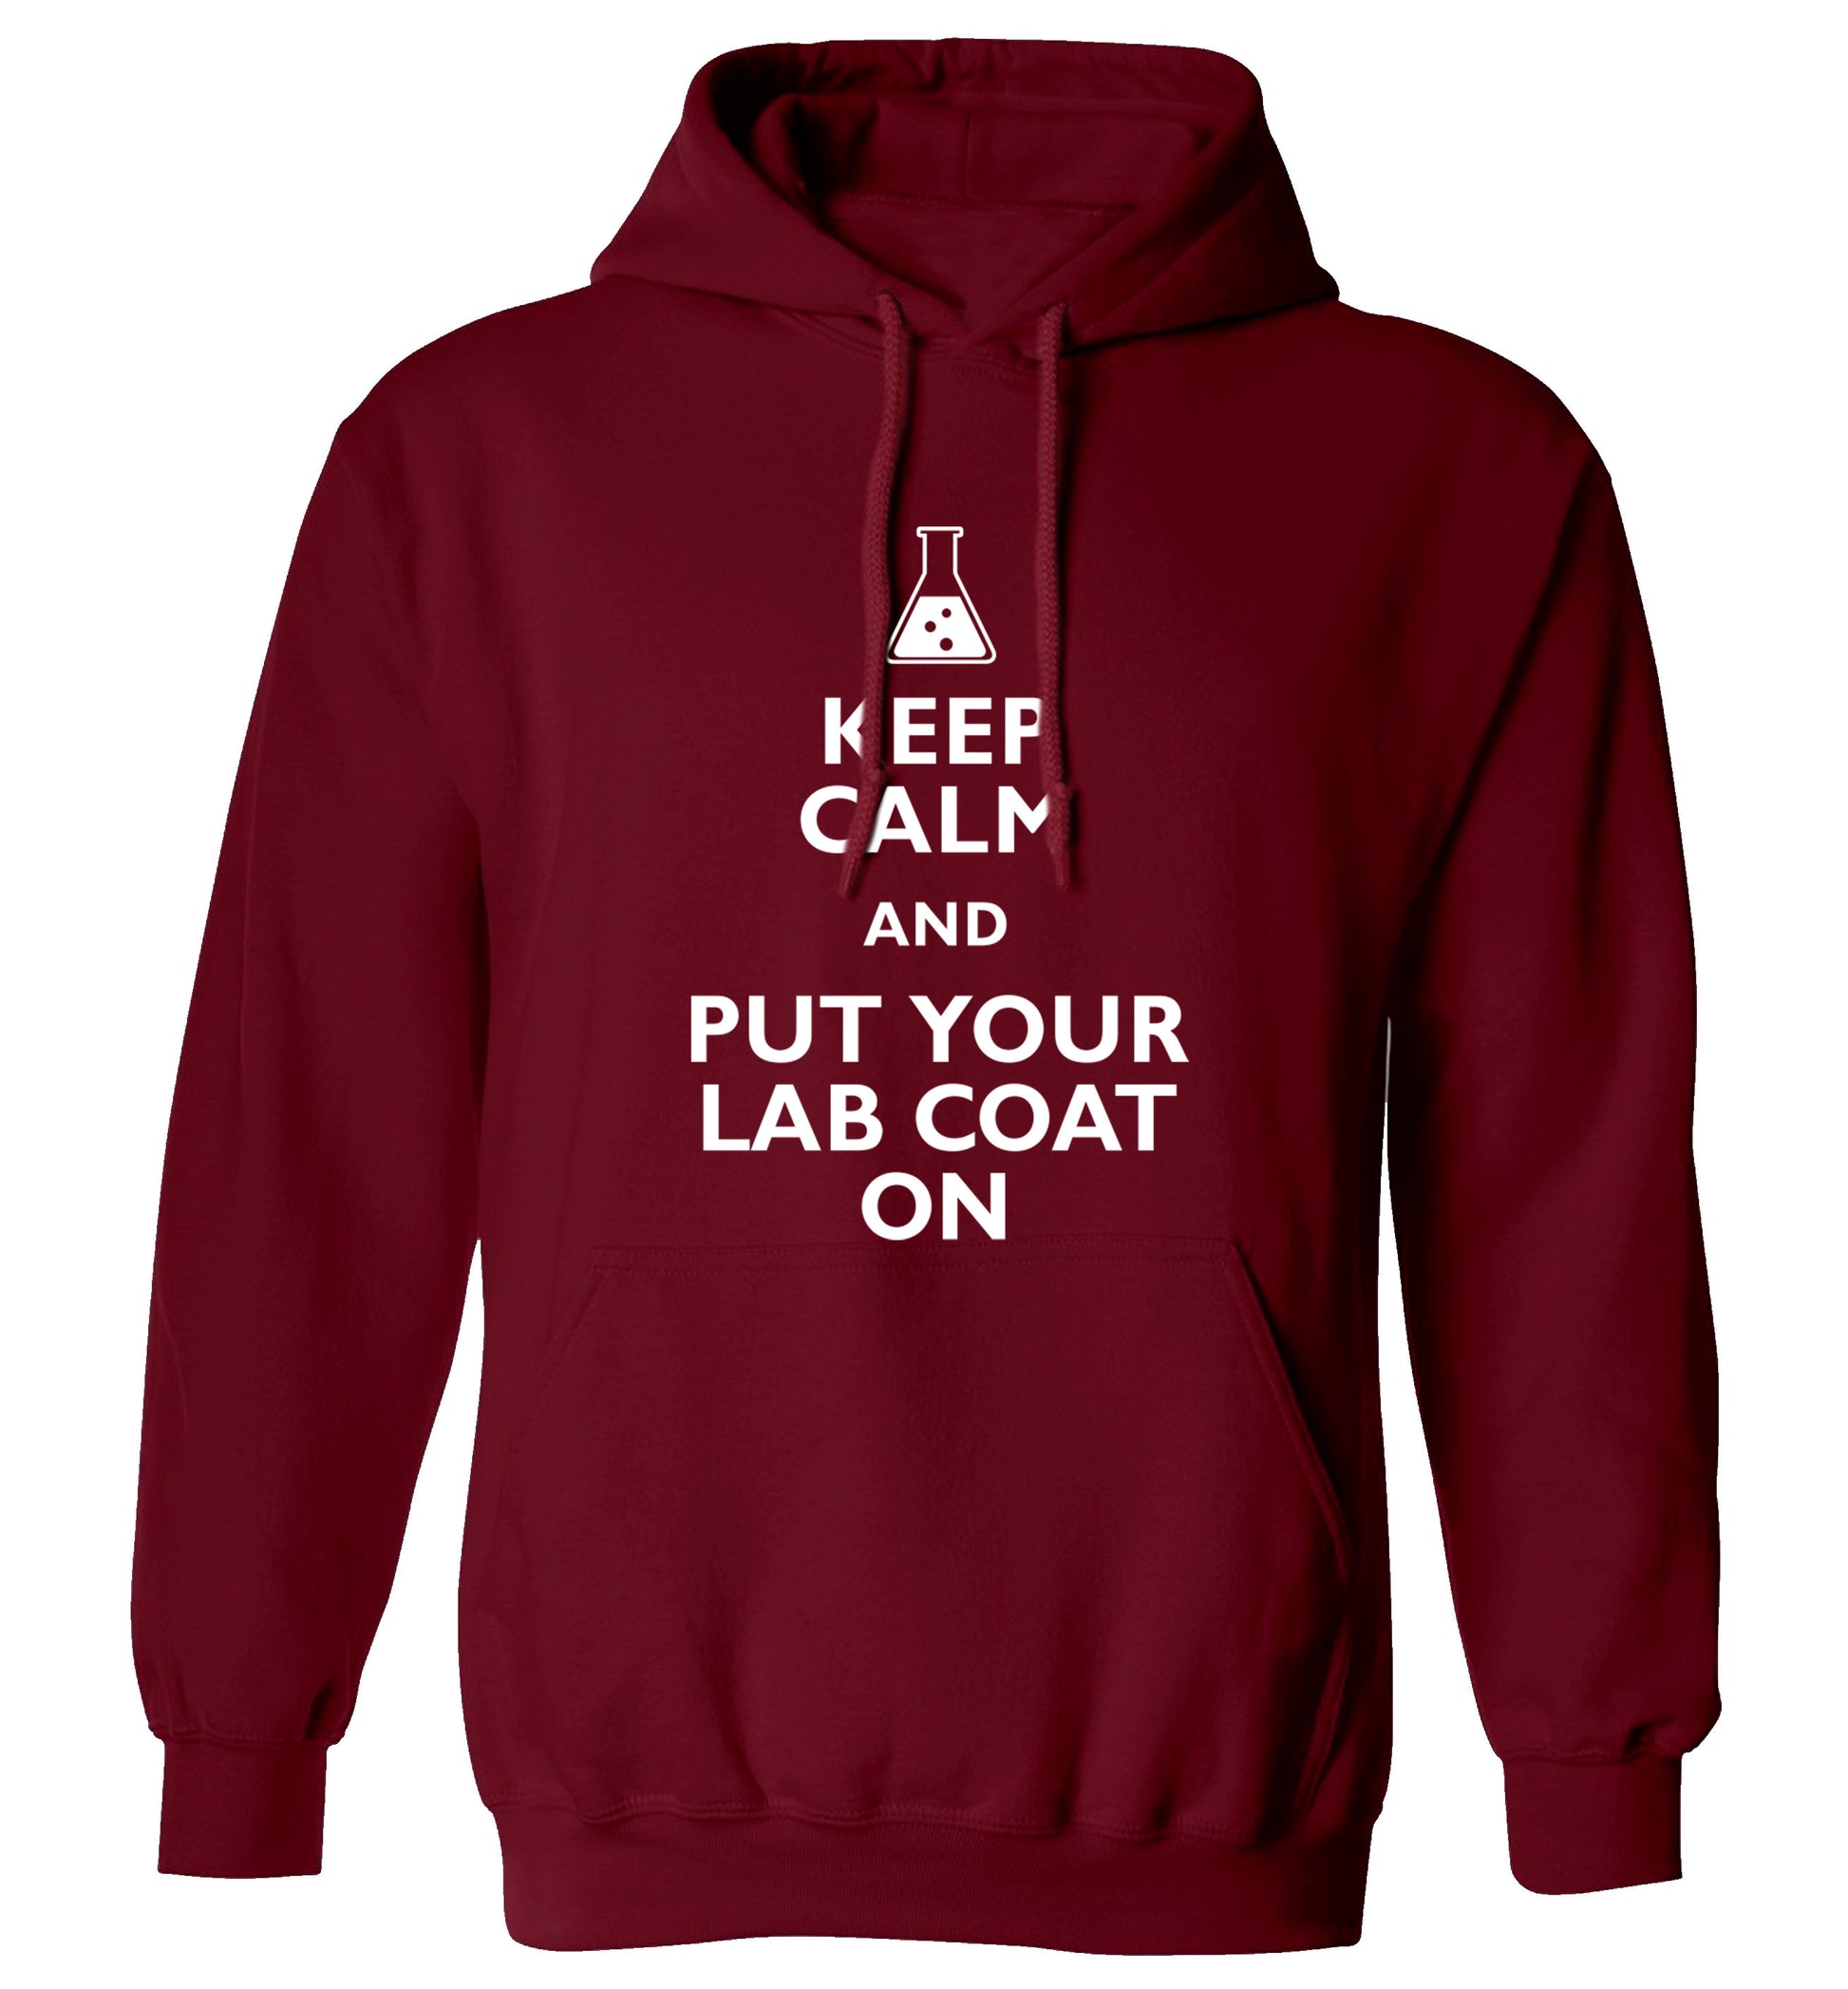 Keep calm and put your lab coat on adults unisex maroon hoodie 2XL